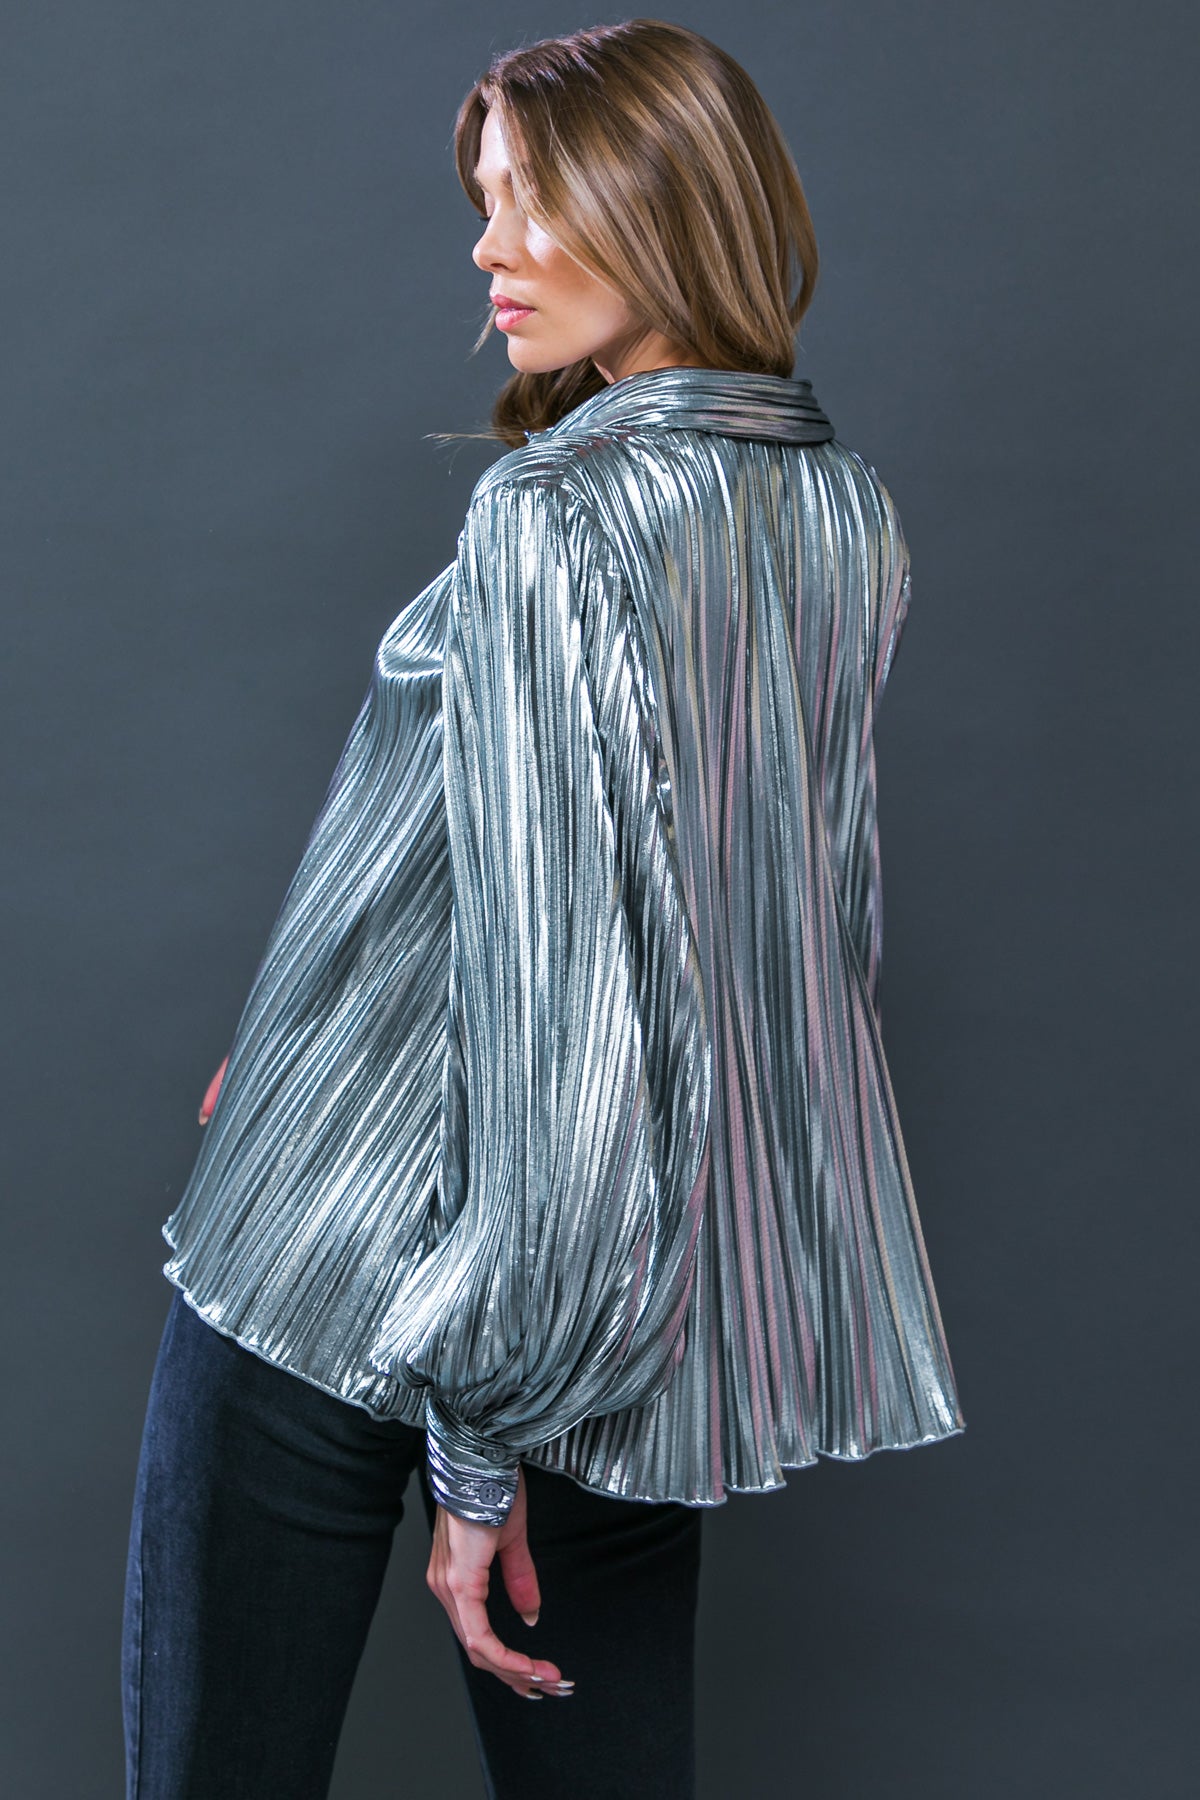 Rock the party with the Cheers! Top! This sparkling pleated piece features a classic shirt collar fit, button down closure, and long sleeves with cuffs for a look that will shut it down. Shine bright and show up in style for your next night out!